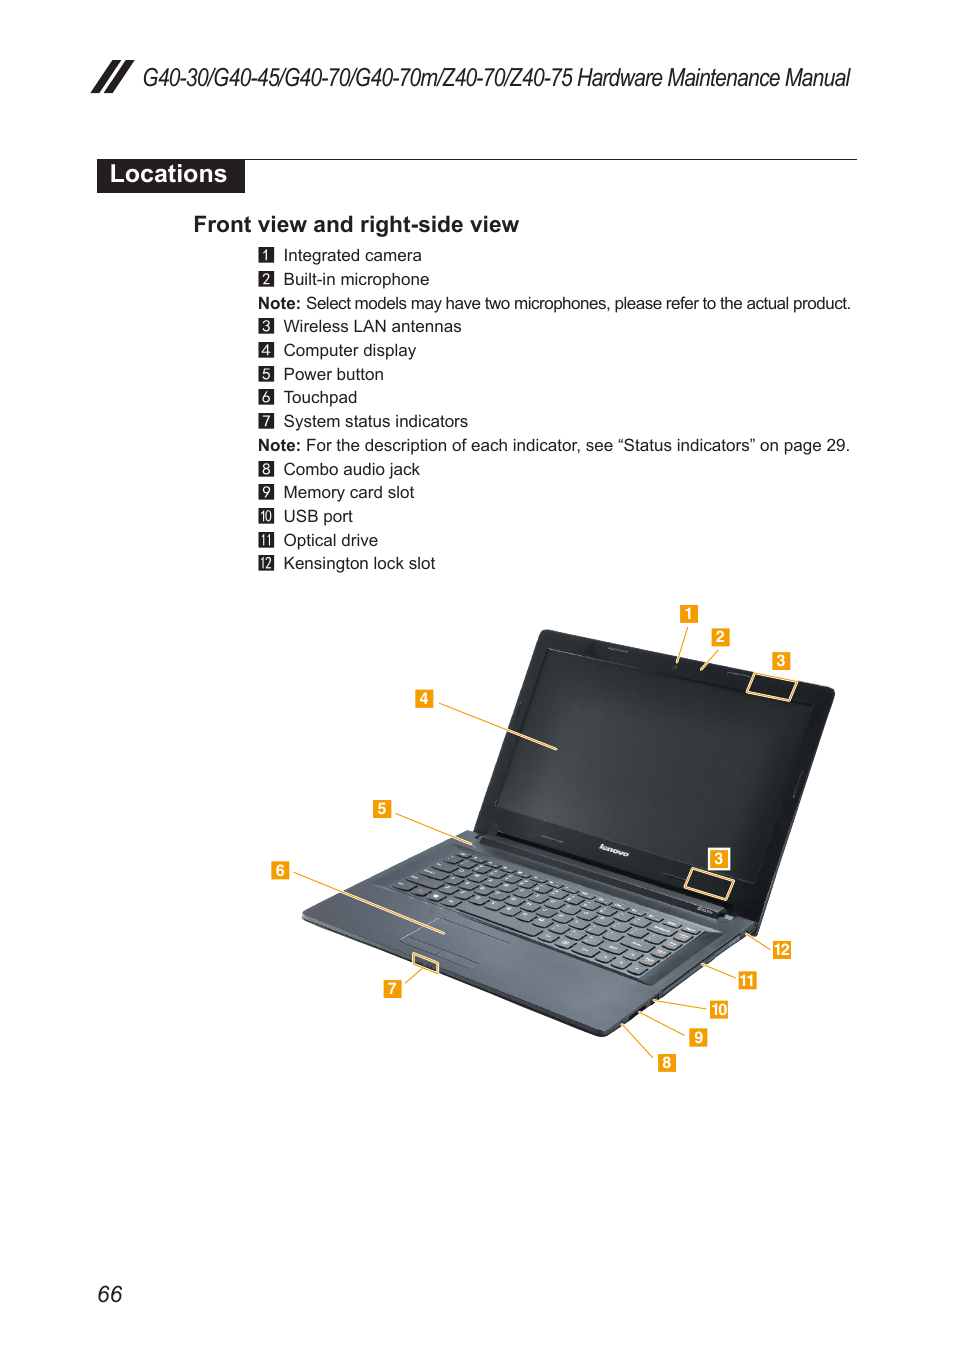 Locations, Front view and right-side view | Lenovo G40-45 Notebook